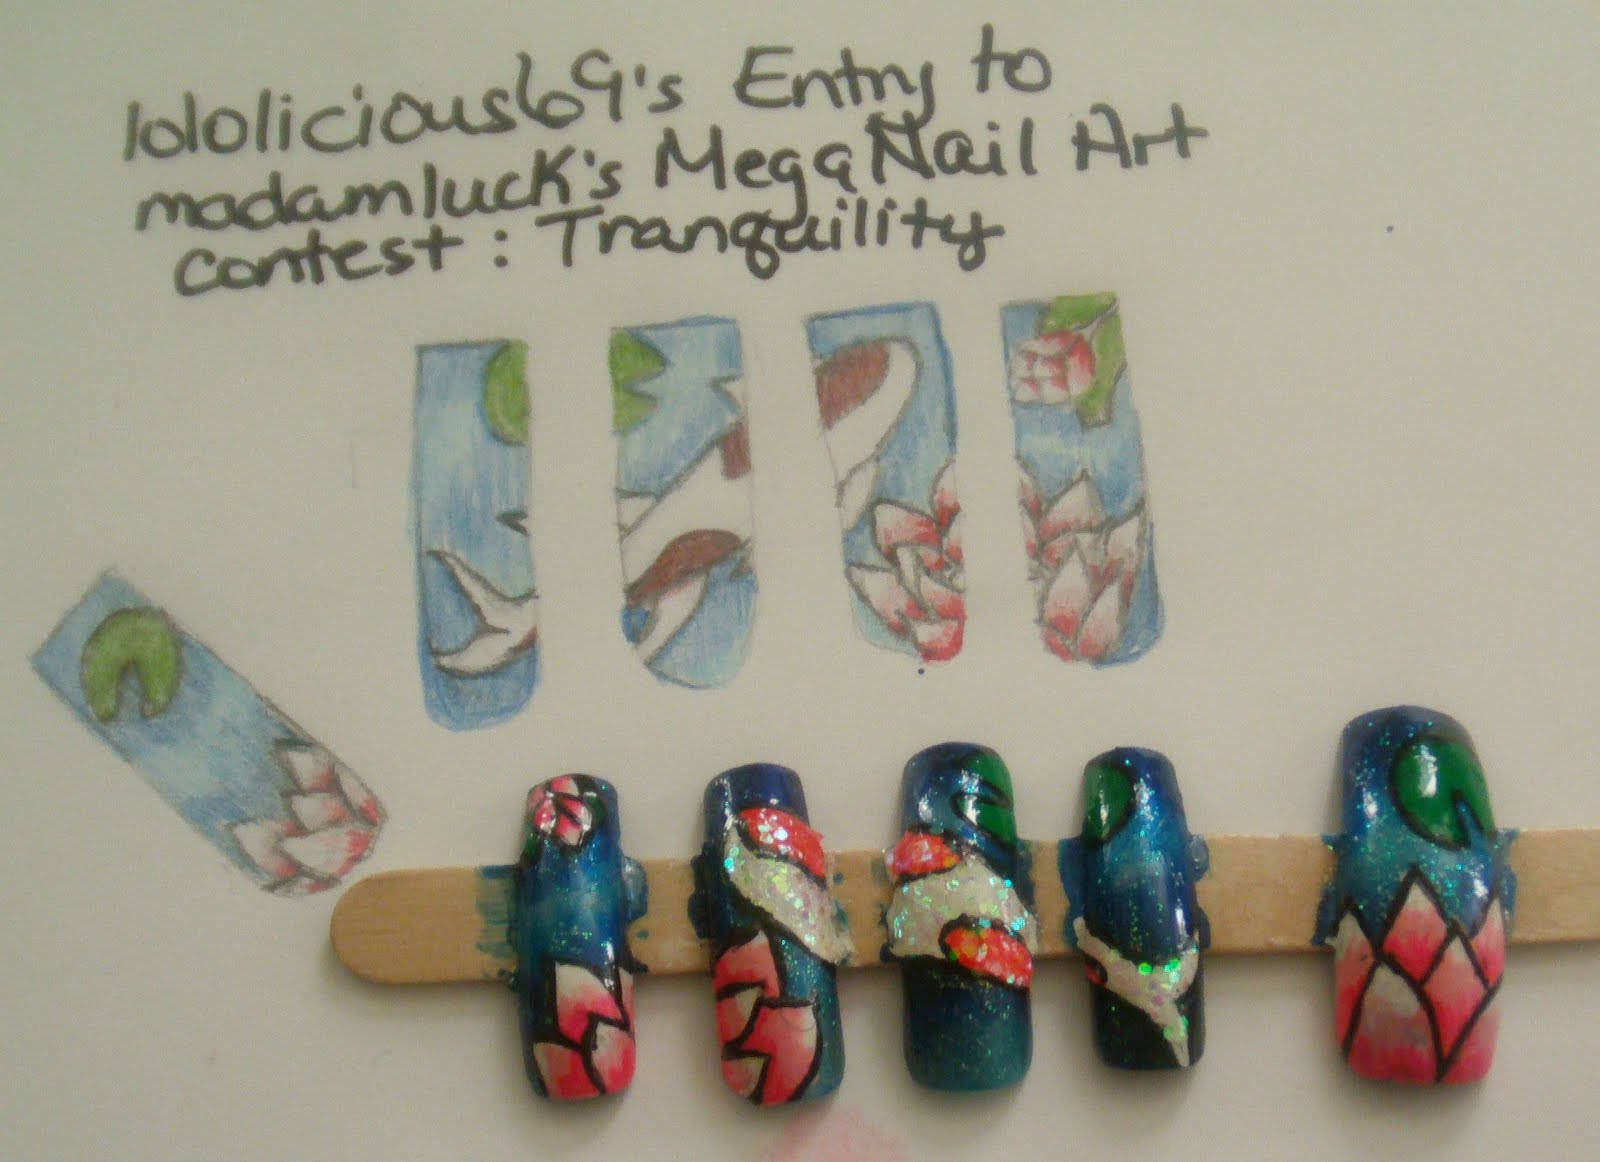 So I guess I should just stick with the 3d nail art designs then =P Here's a